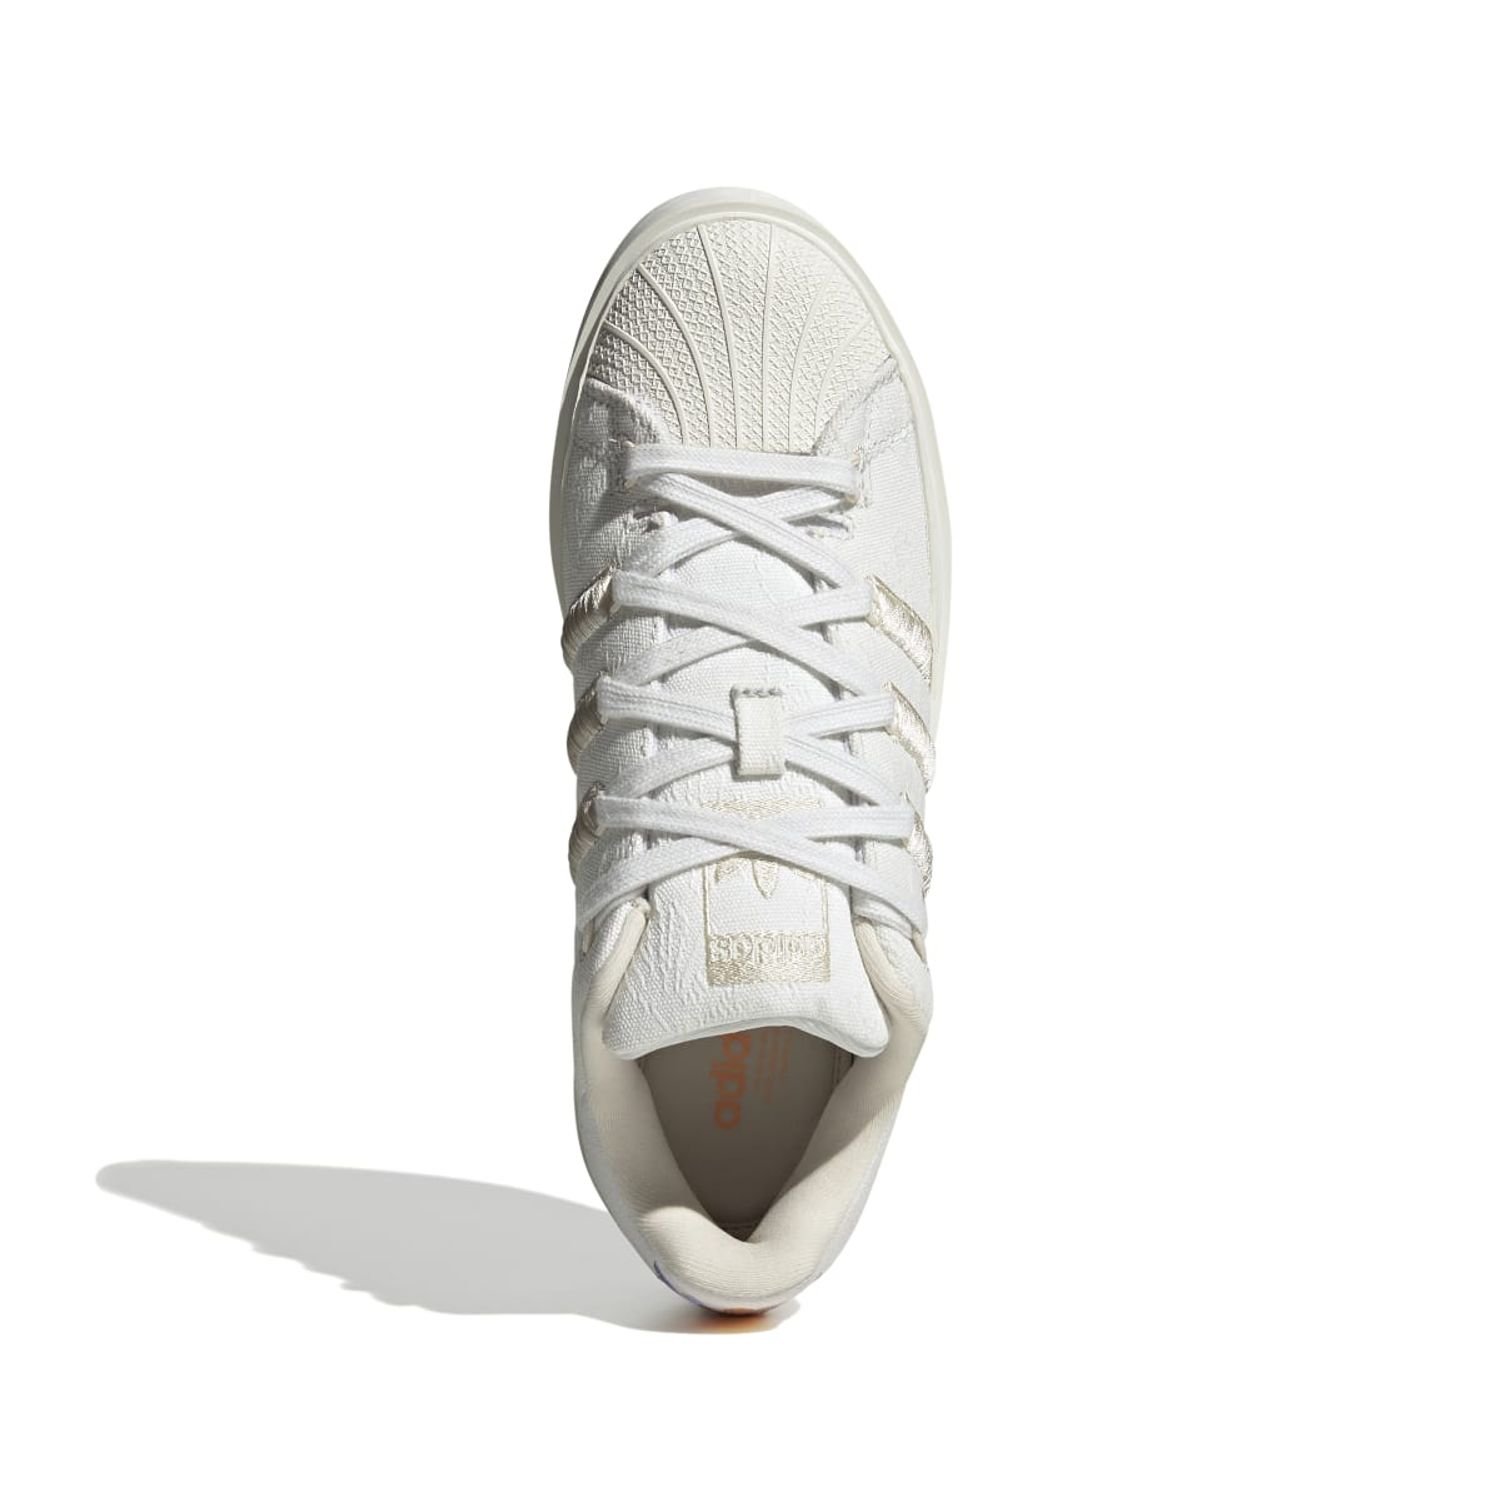 adidas Superstar Bonega sneakers in off white - ShopStyle